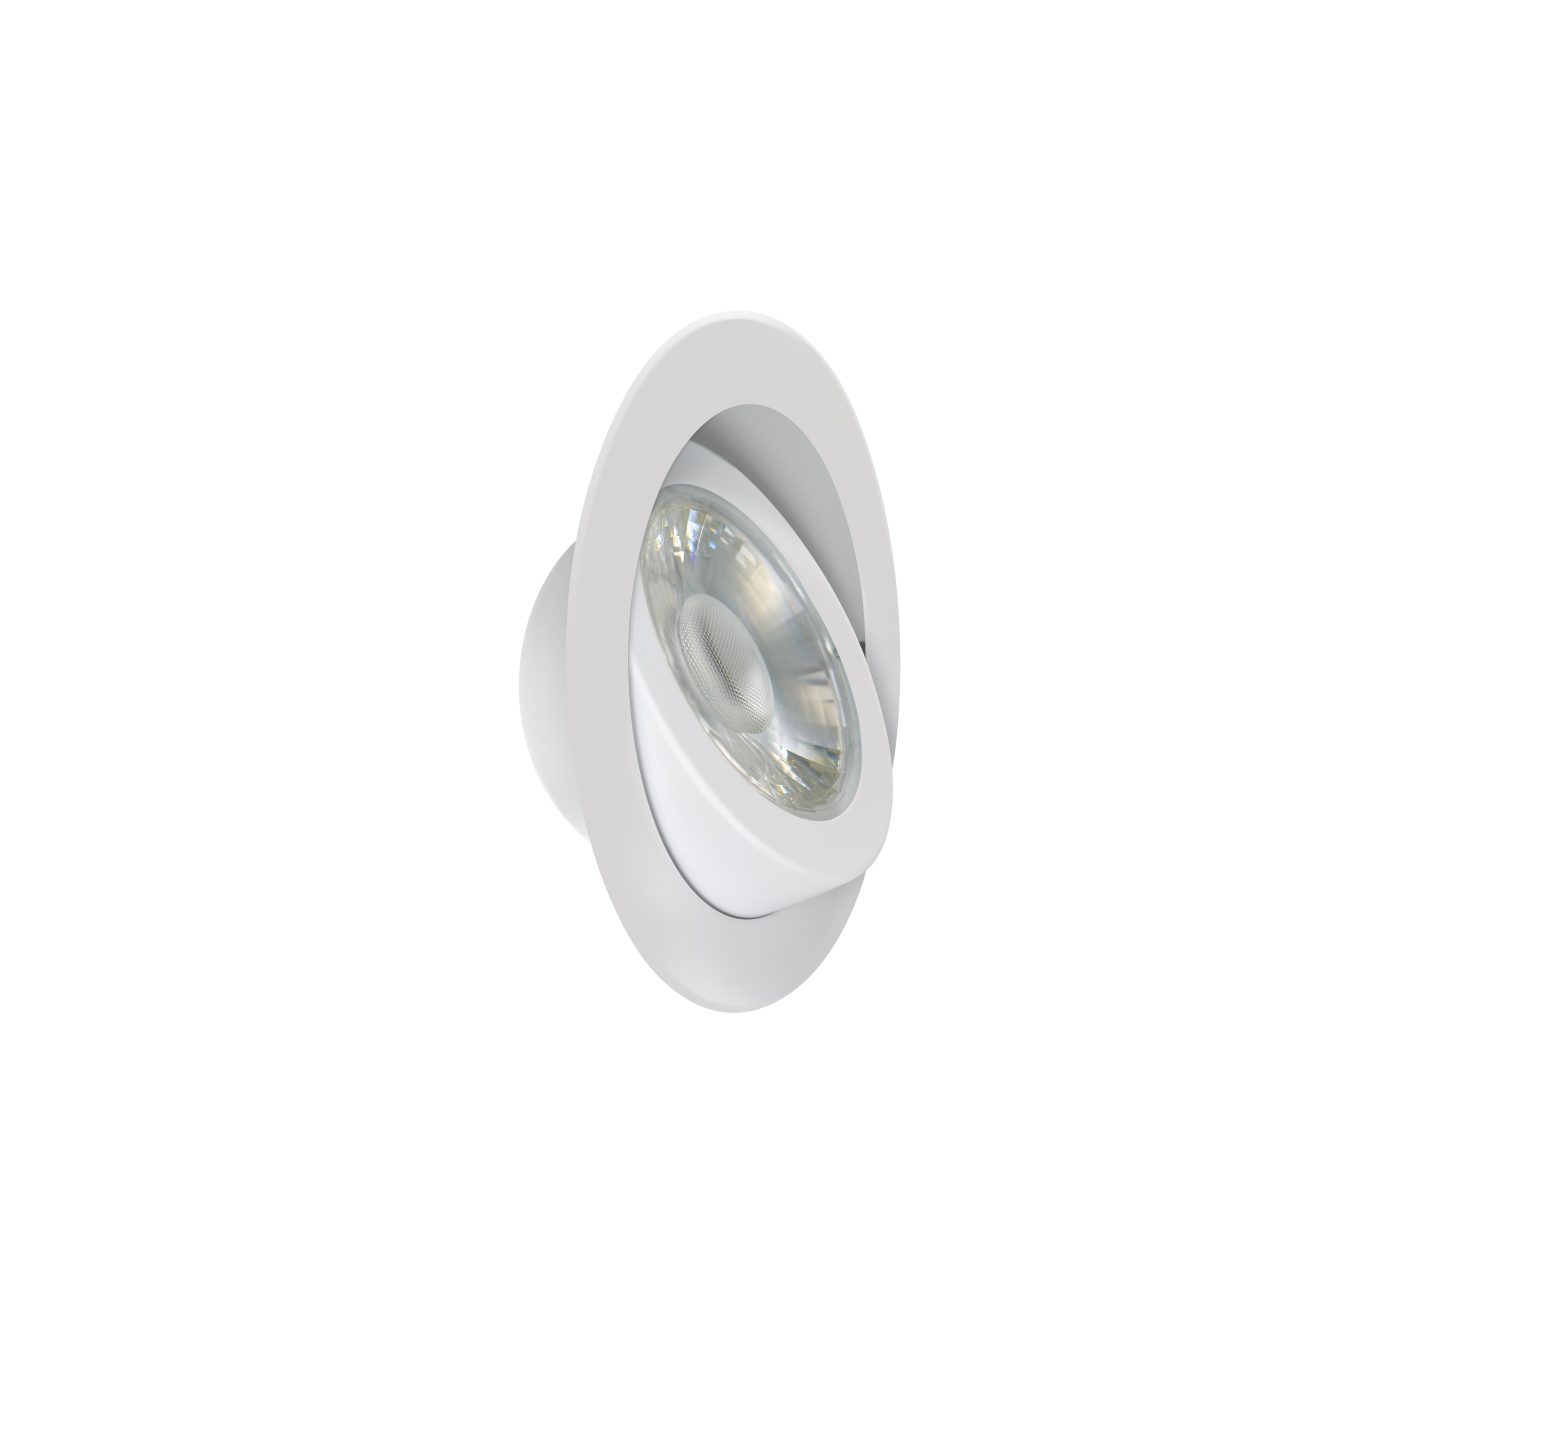 FEIT Electric LEDR4XT/ADJ/6WYCA 4 inch Color Selectable J-Box Adjustable LED Recessed Downlight Instruction Manual